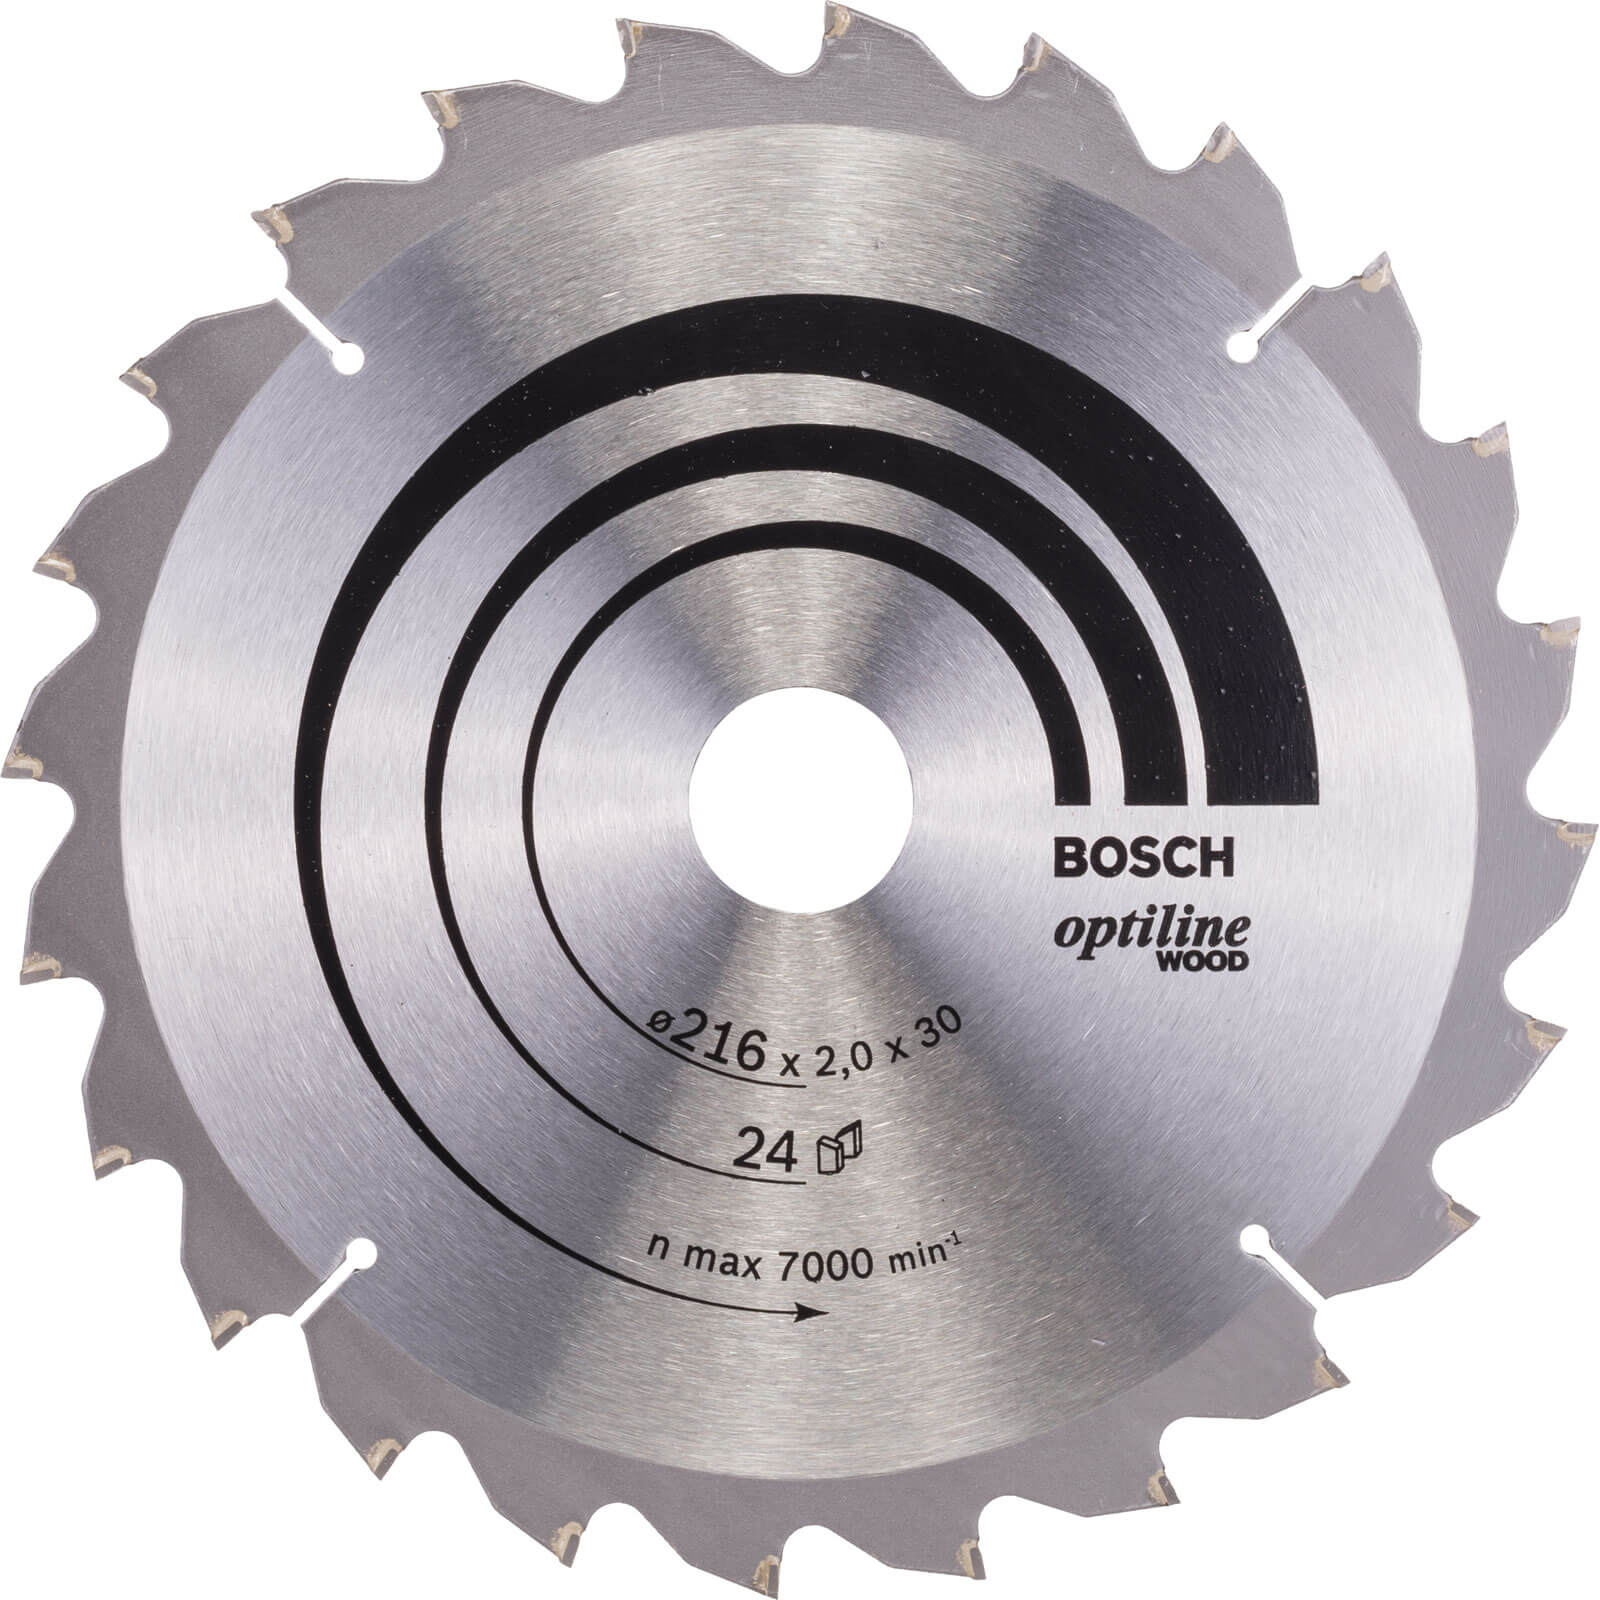 Image of Bosch Optiline Wood Cutting Mitre Saw Blade 216mm 24T 30mm